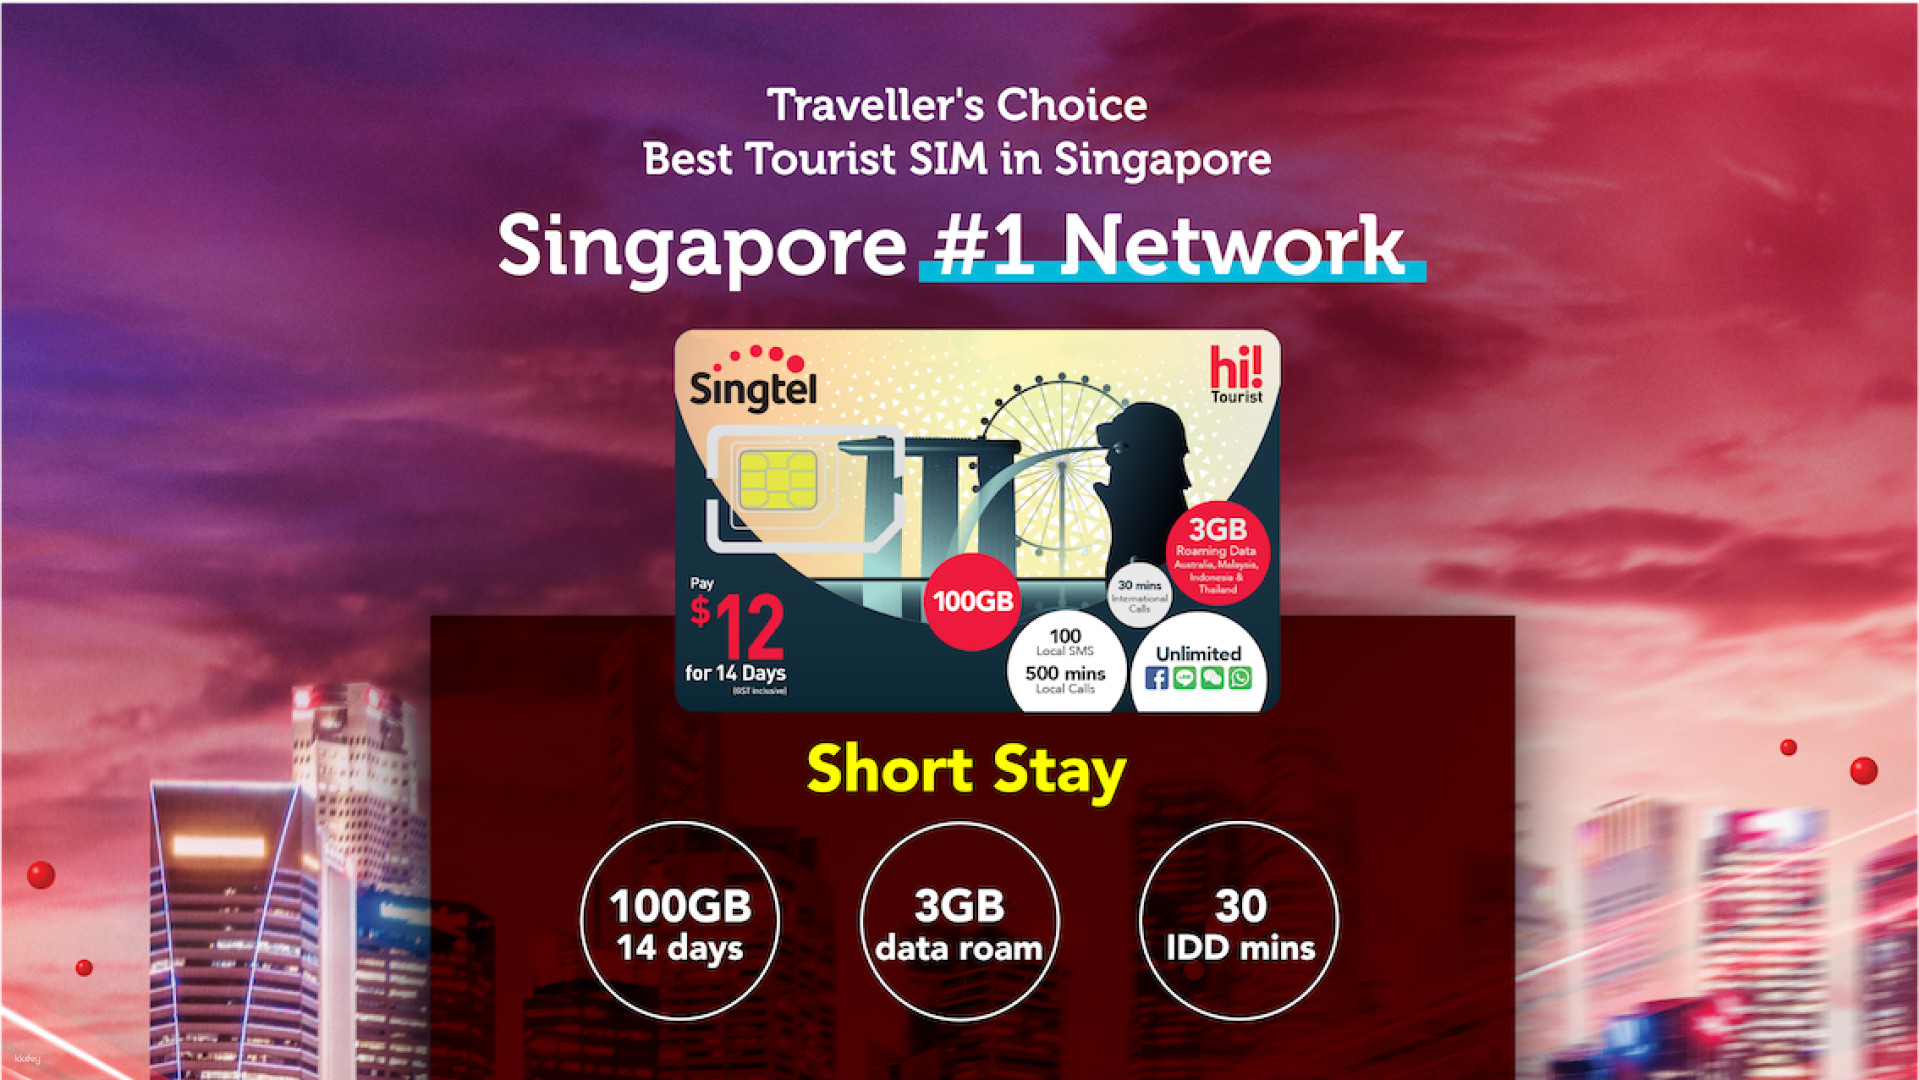 [Mikitravel Exclusive] Singapore #1 Network| Singtel 5G/4G eSIM Card | Up to 120GB